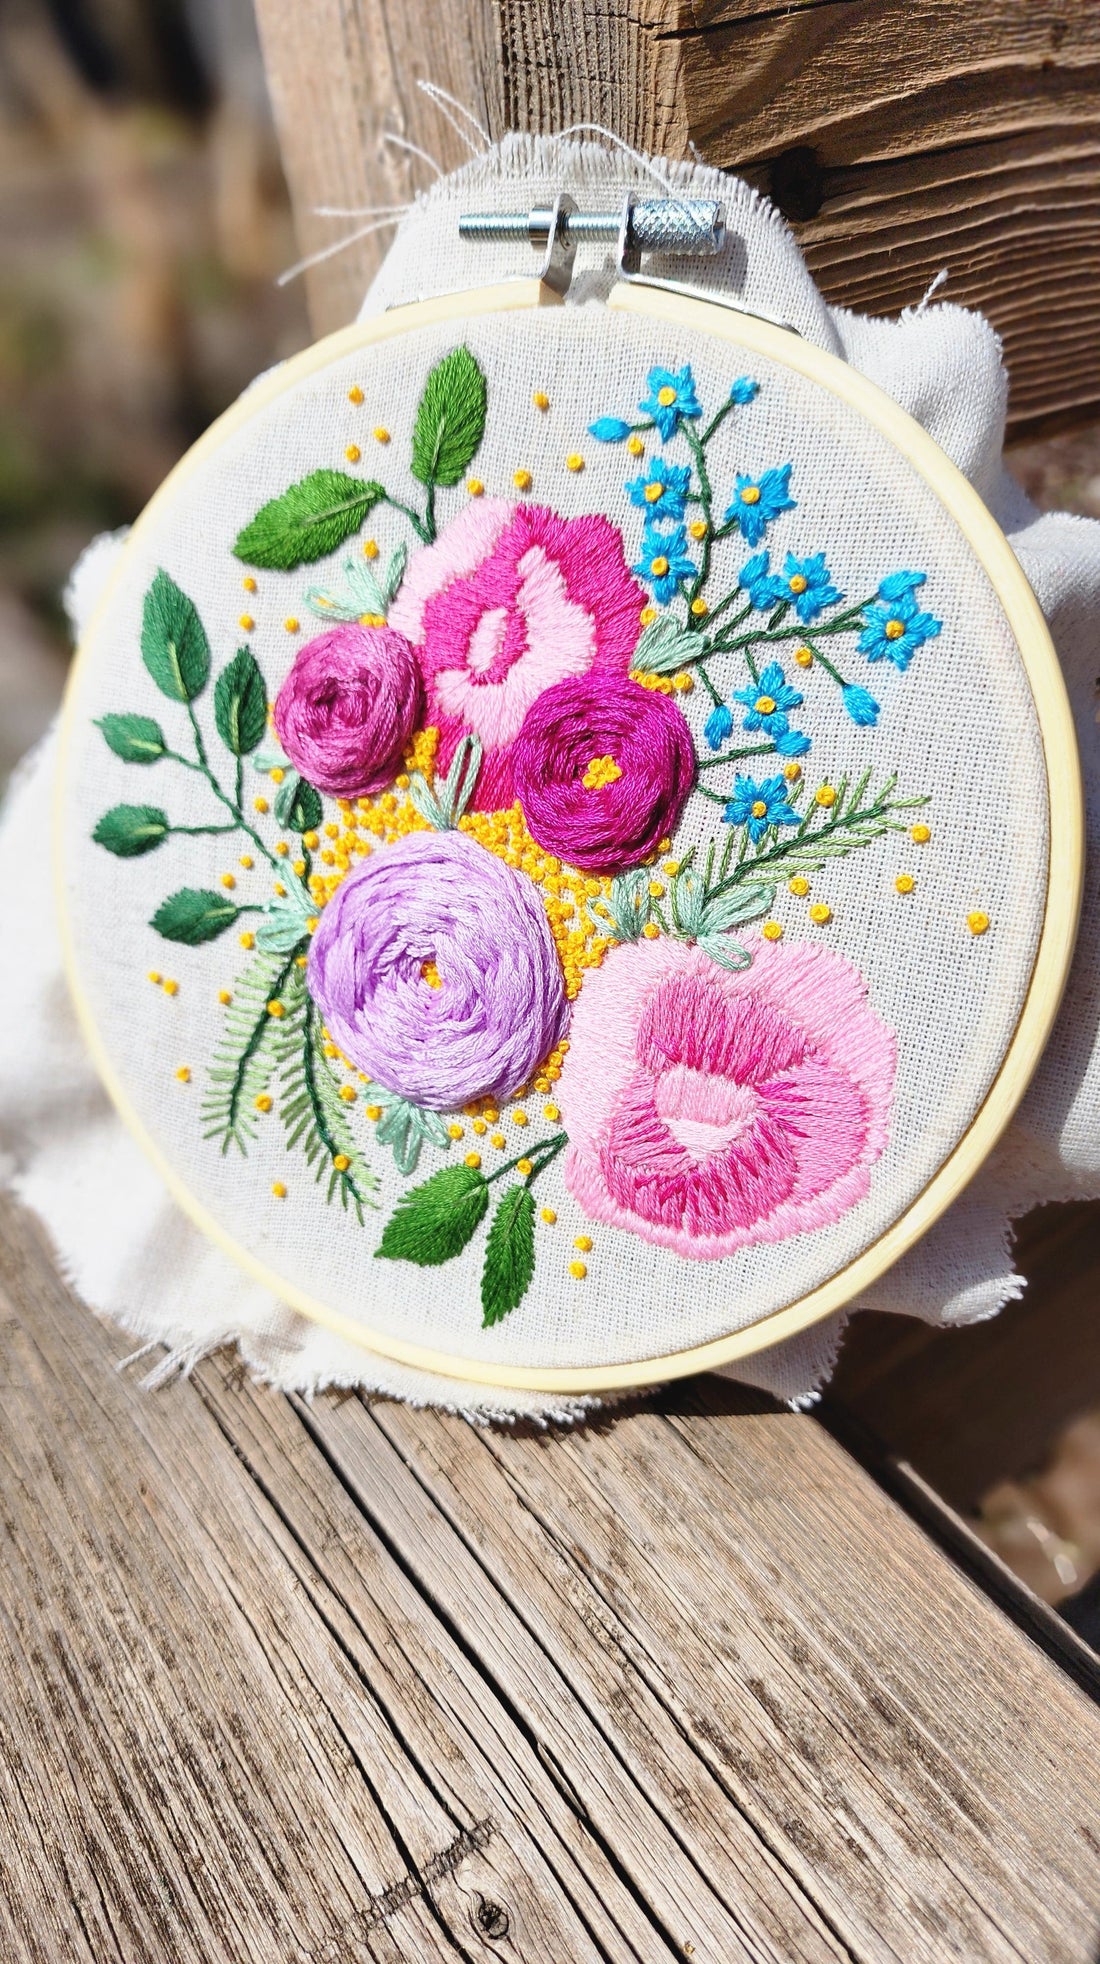 Embroidery Supplies for Beginners: Your Essential Starter Kit